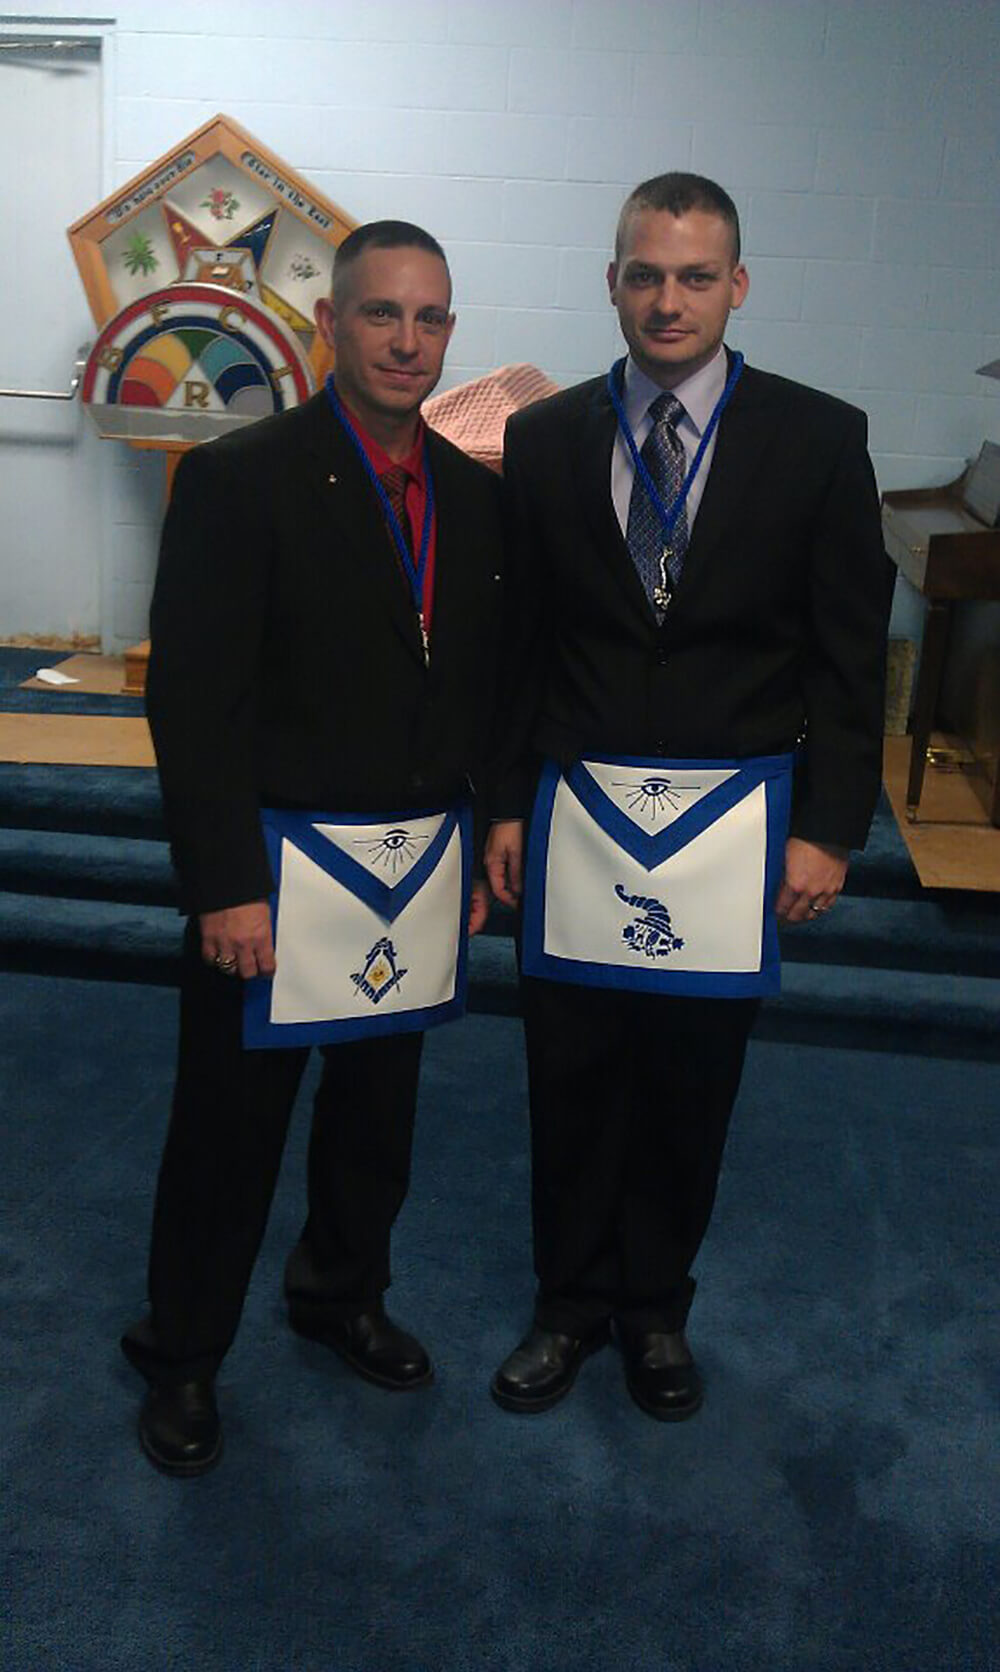 Randolph Matz and Keith at Lawton Masonic Lodge #183 when they were installed as Senior and Junior Stewards for the lodge